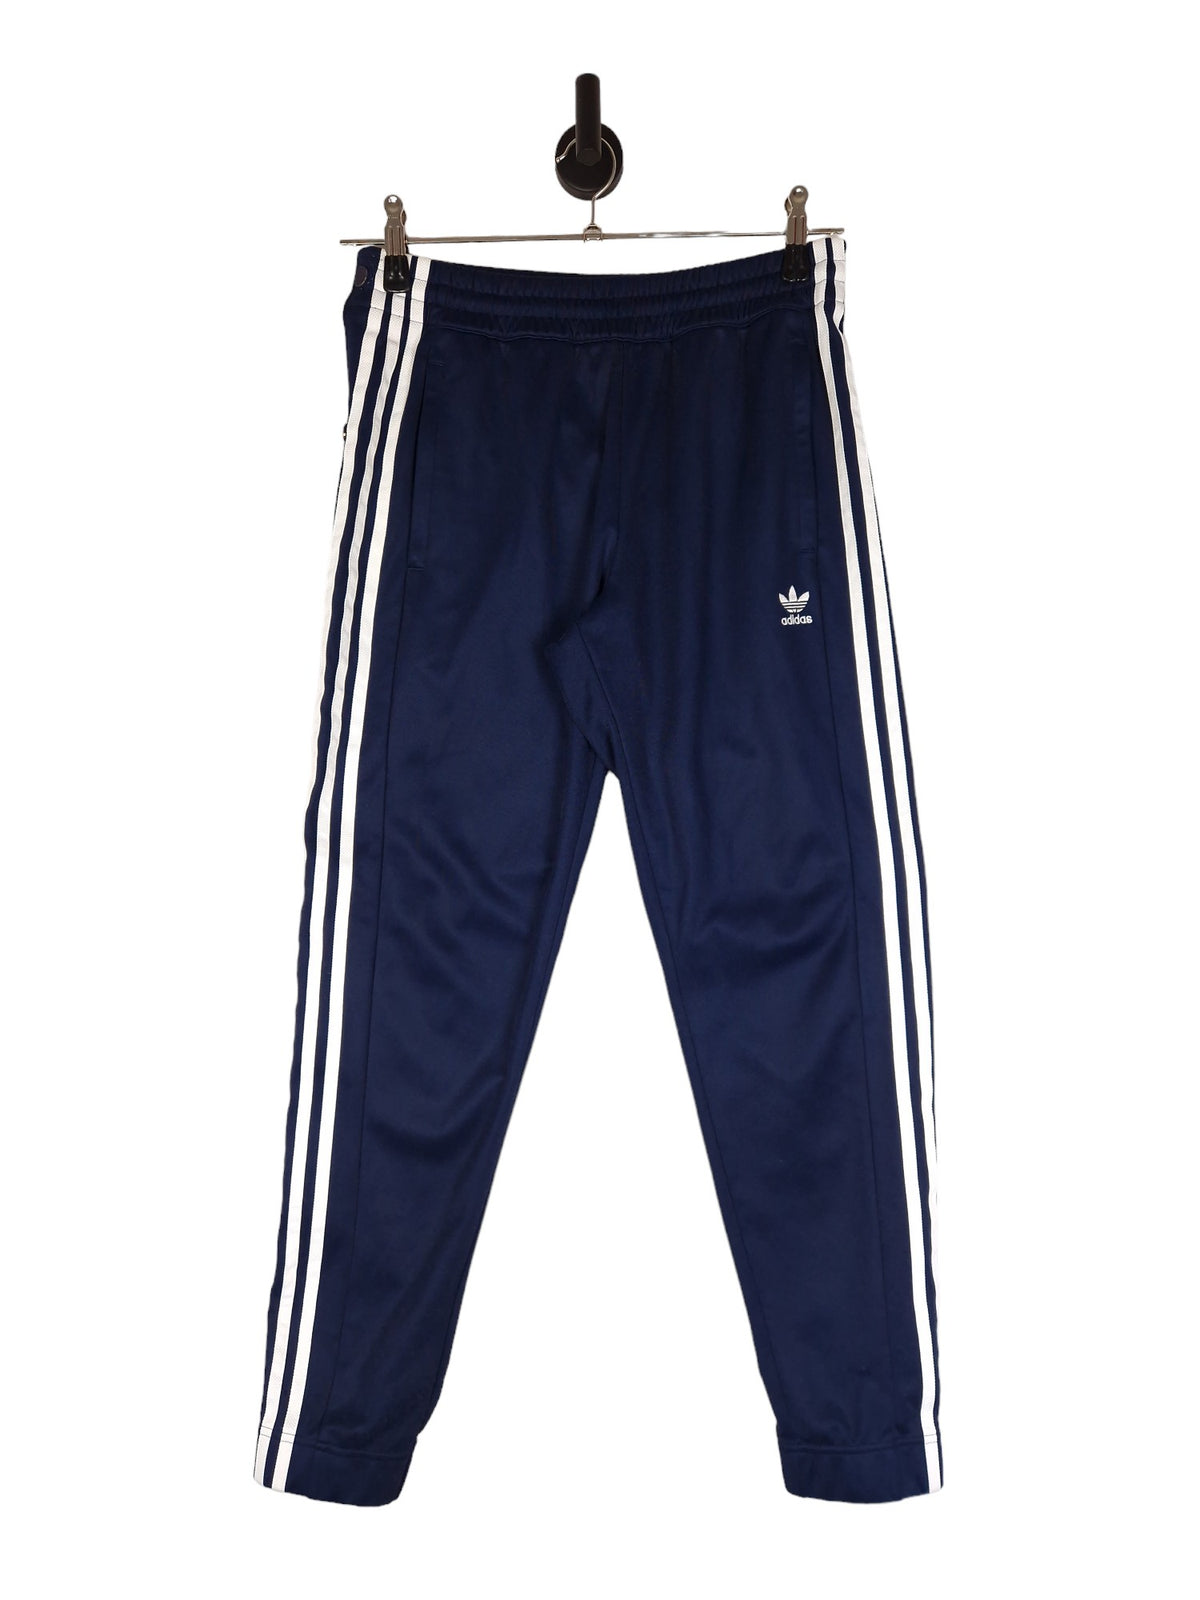 Adidas Poppers Tracksuit Bottoms - Size Medium